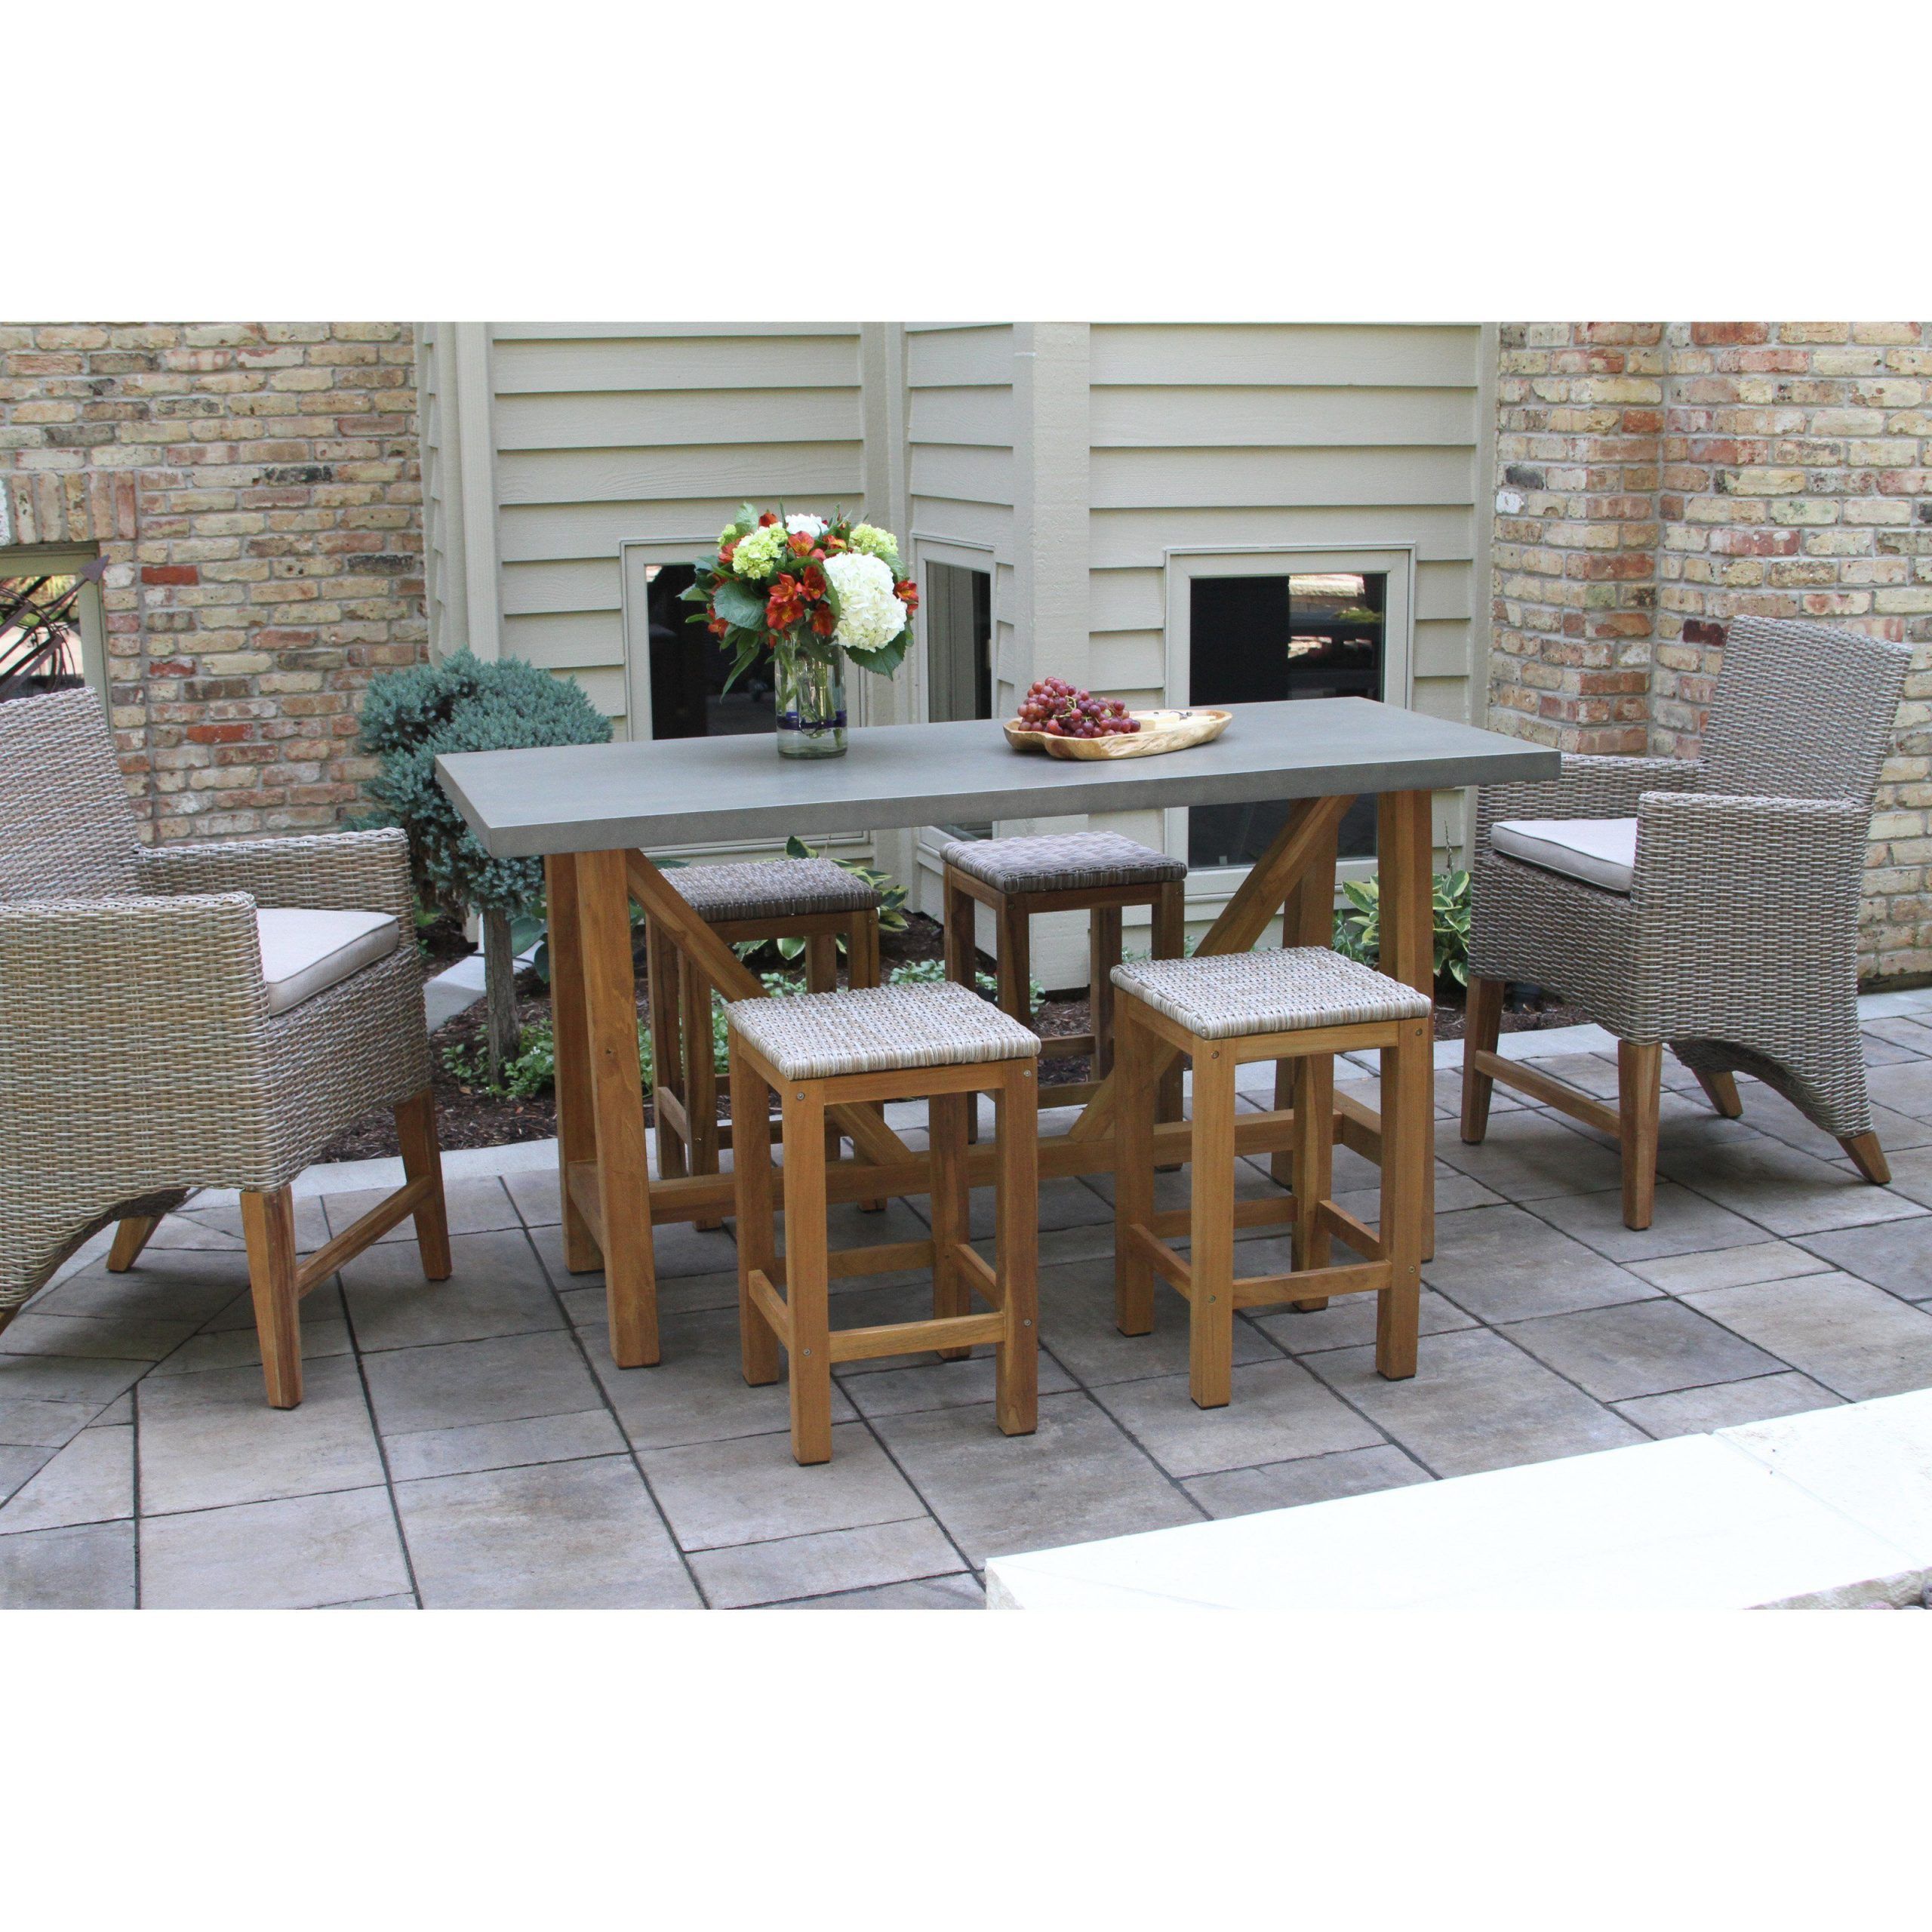 Hn Outdoor Scottsdale Wicker & Teak 7 Piece Composite Tabletop Counter Intended For 7 Piece Teak Wood Dining Sets (View 14 of 15)